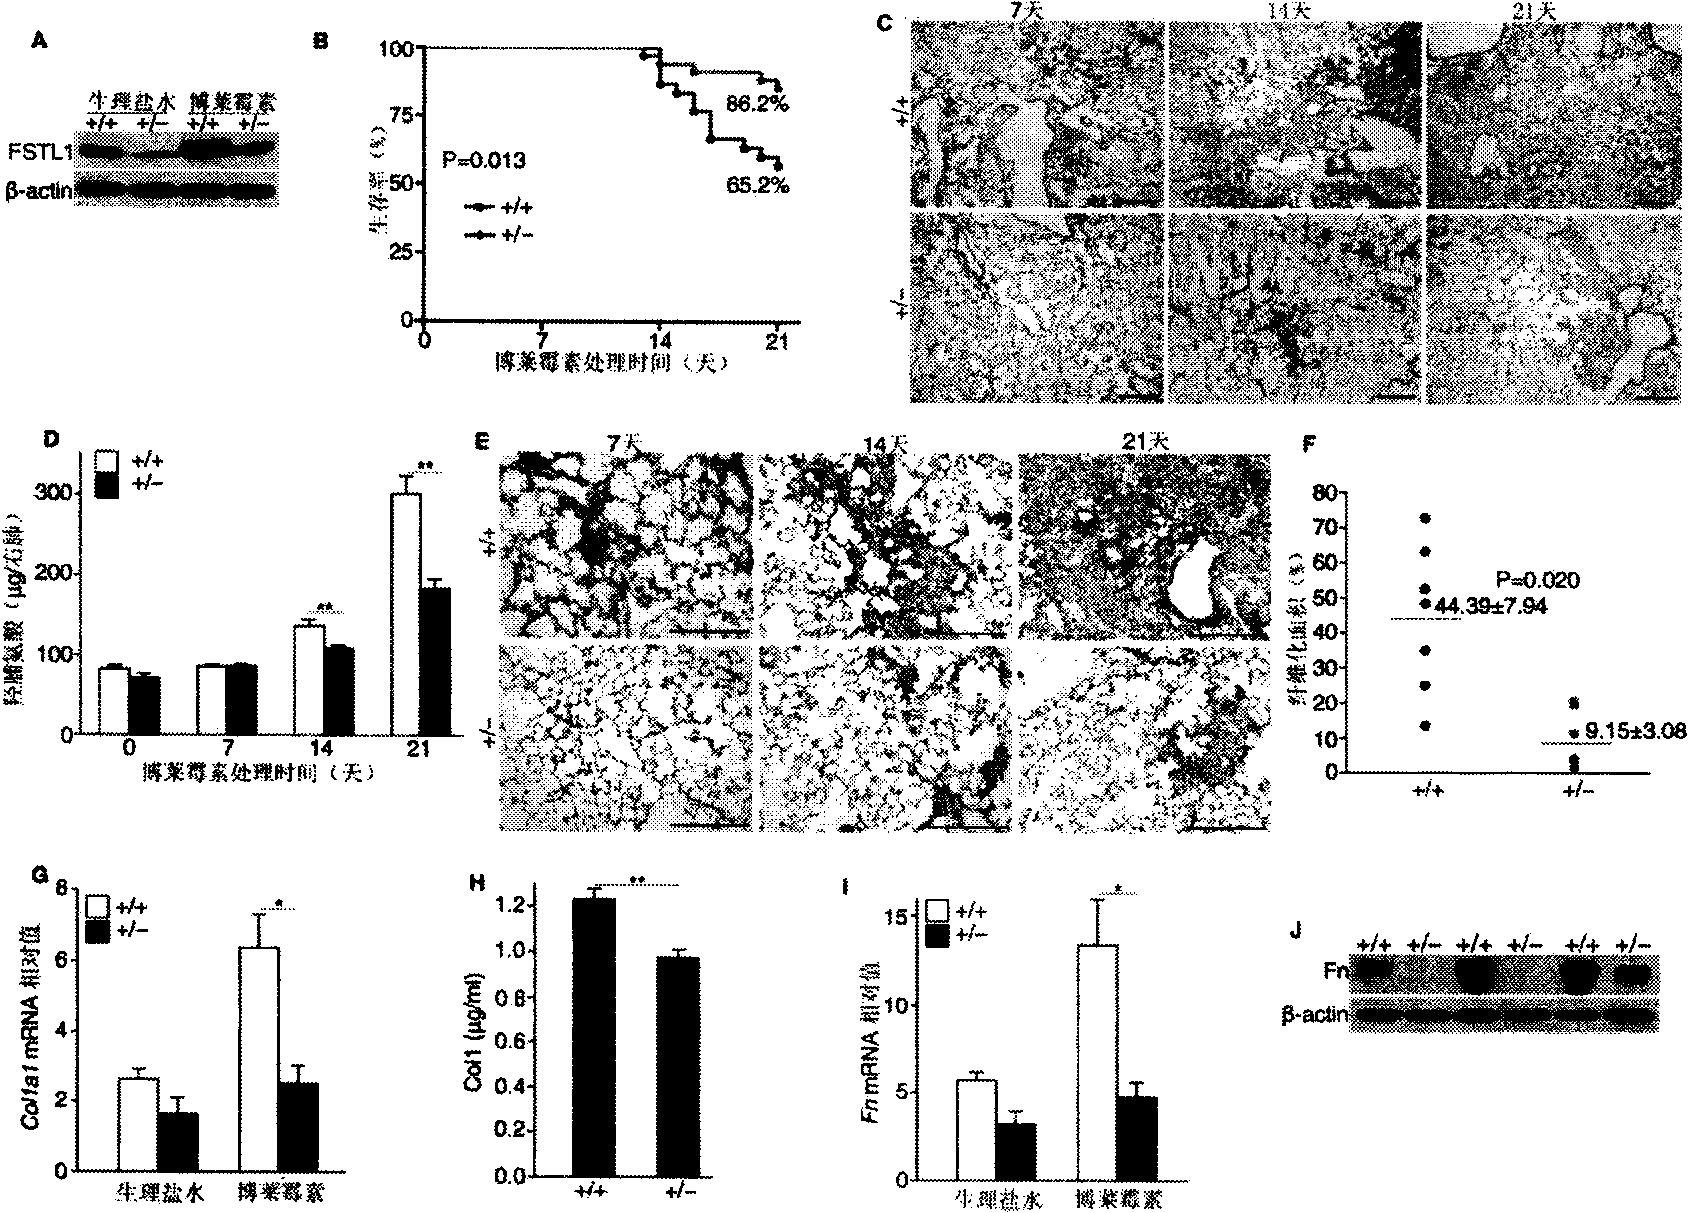 Monoclonal antibody of follistatin-like protein l and application thereof